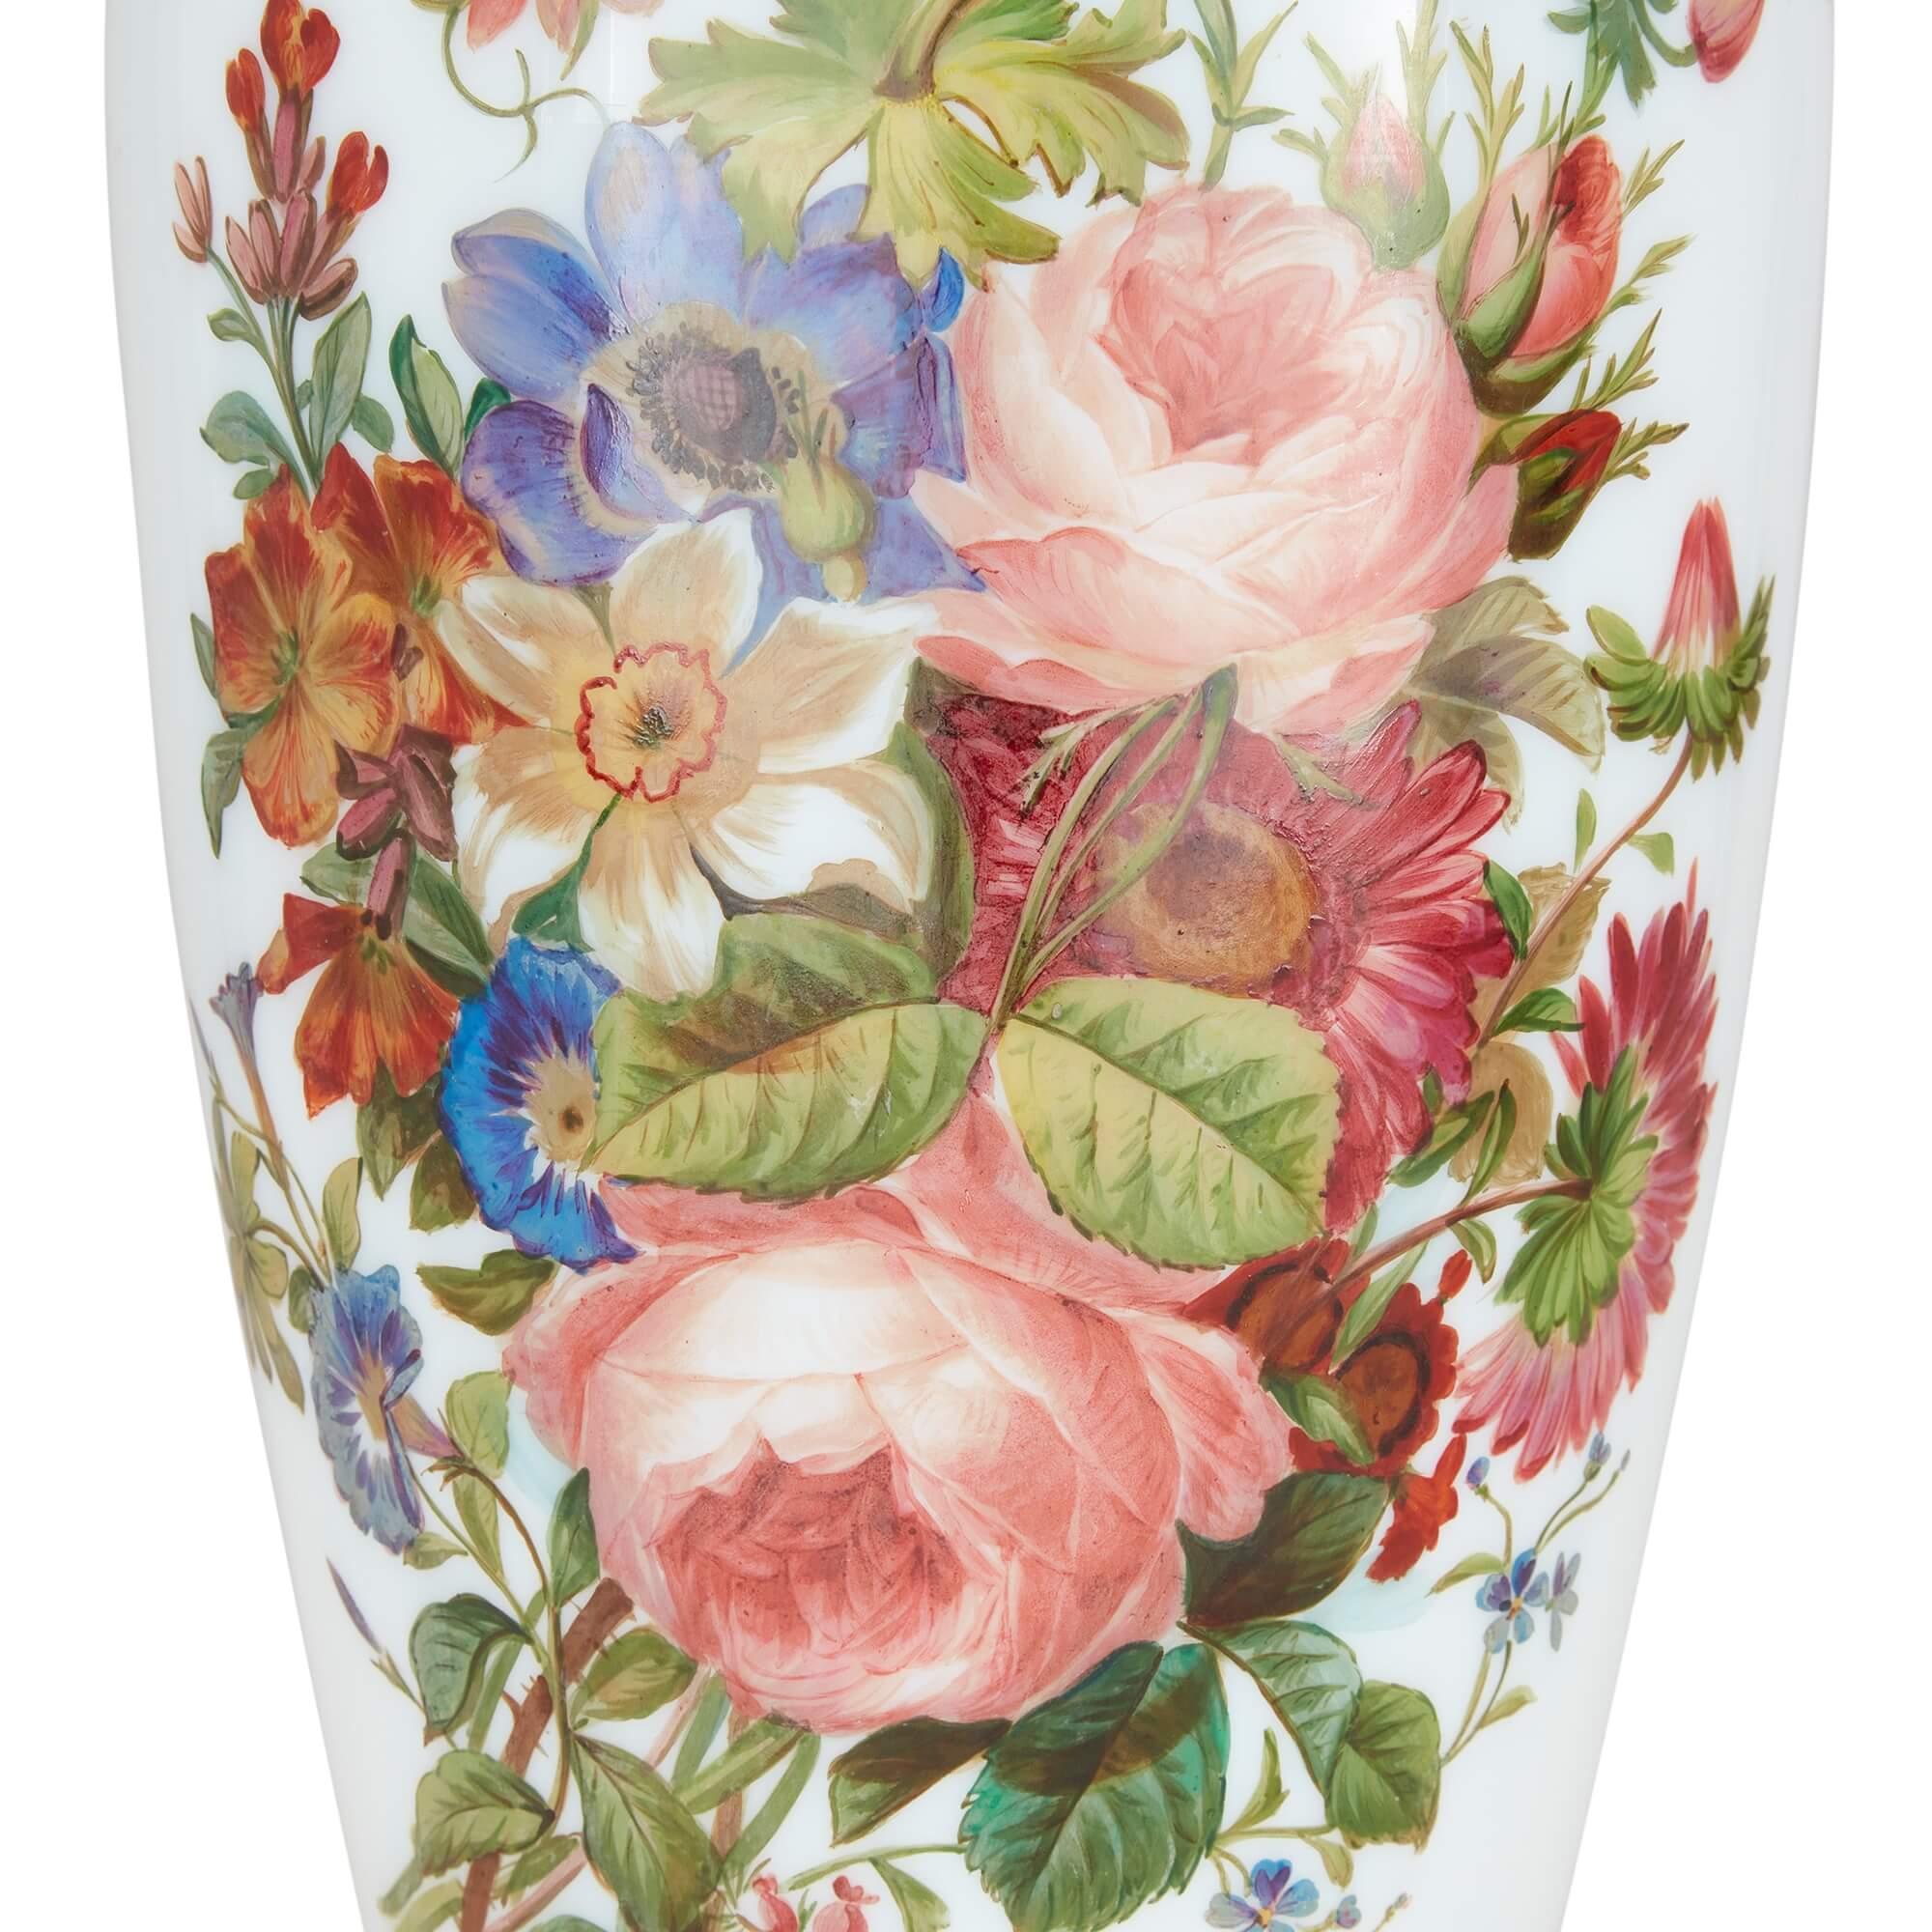 Pair of floral opaline glass vases by Baccarat
French, 19th Century
Height 55.5cm, diameter 20cm

Wonderfully crafted by Baccarat, the renowned French firm of glass manufacturers, this pair of vases is adorned throughout with charming bouquets of